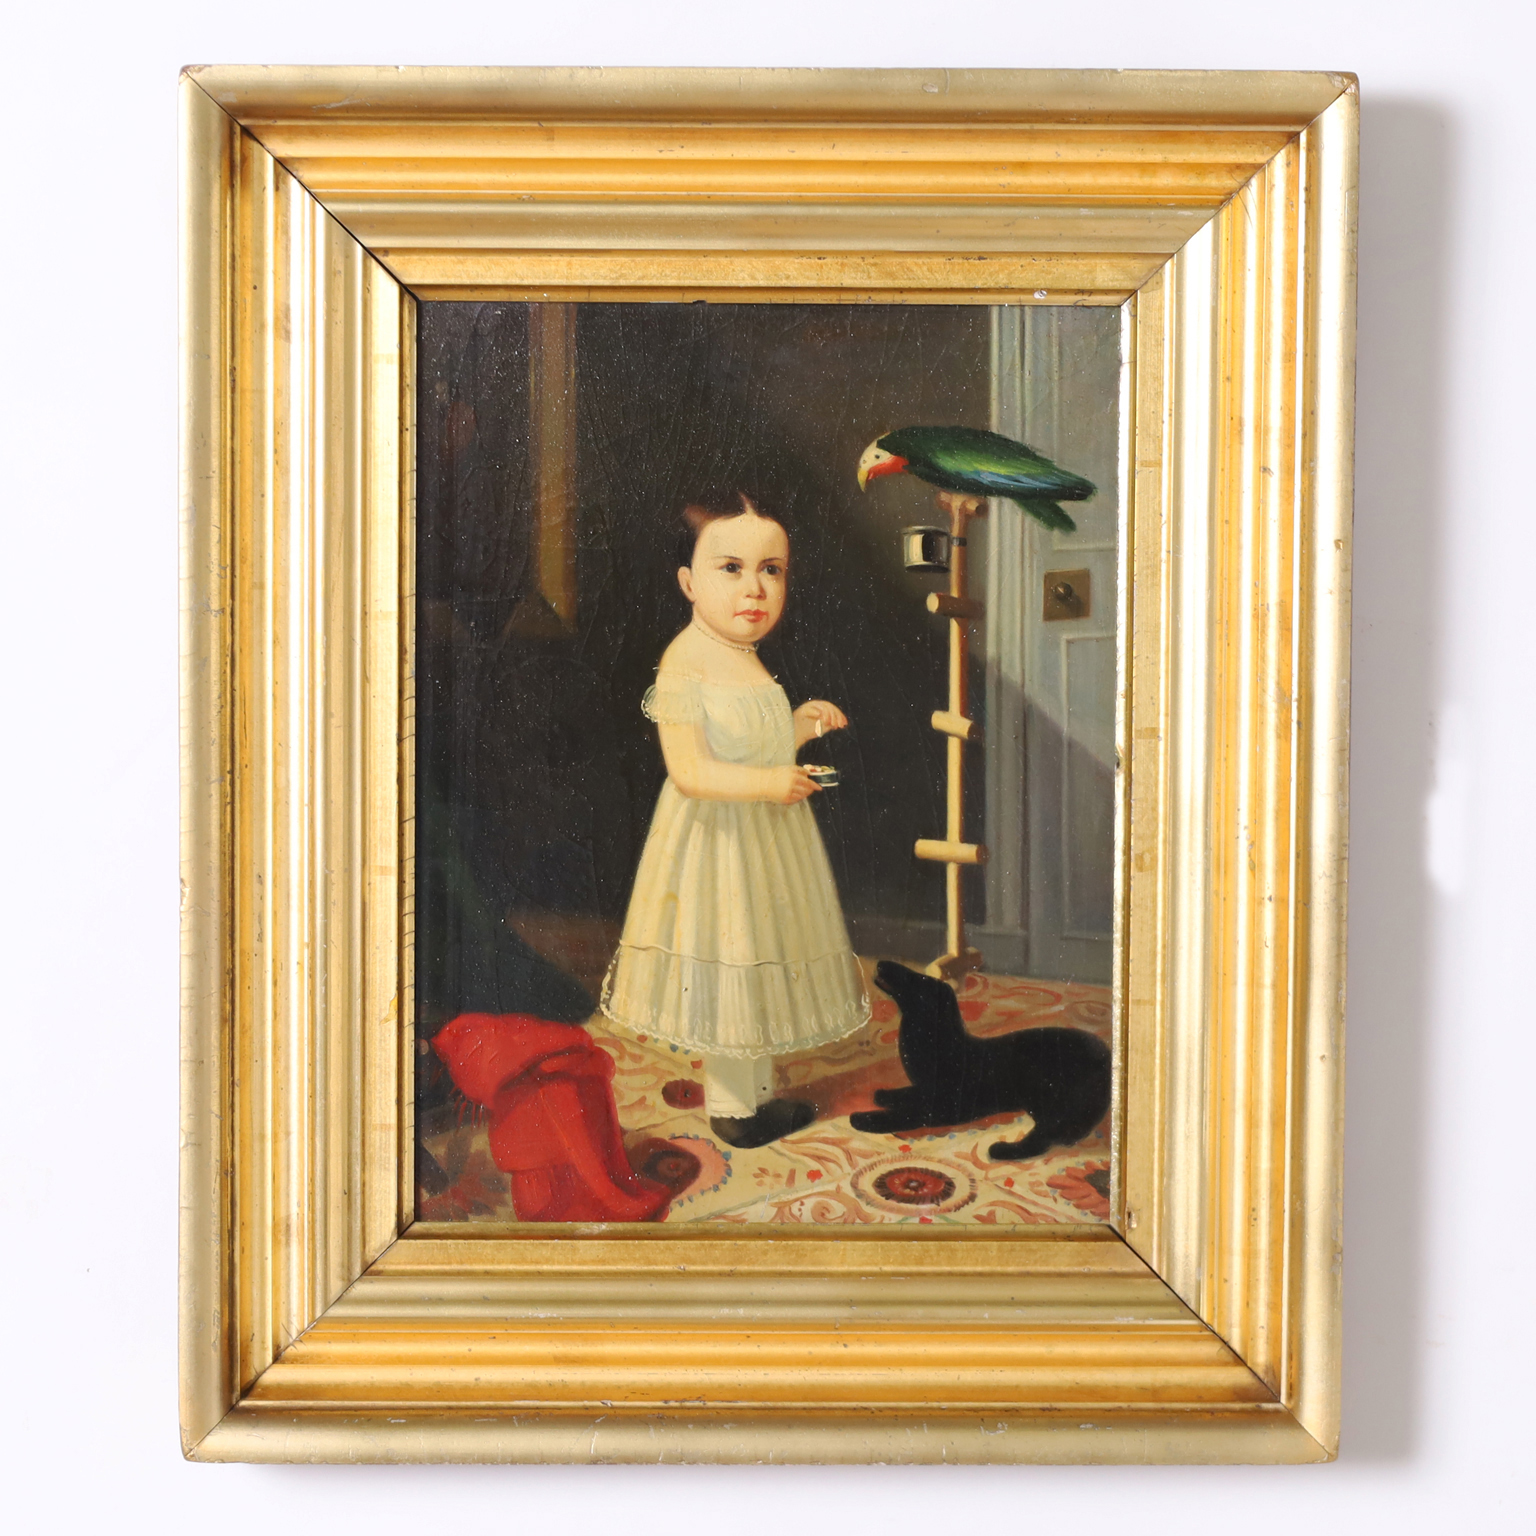 Antique Victorian Oil Painting on Board of a Girl with Dog and Parrot